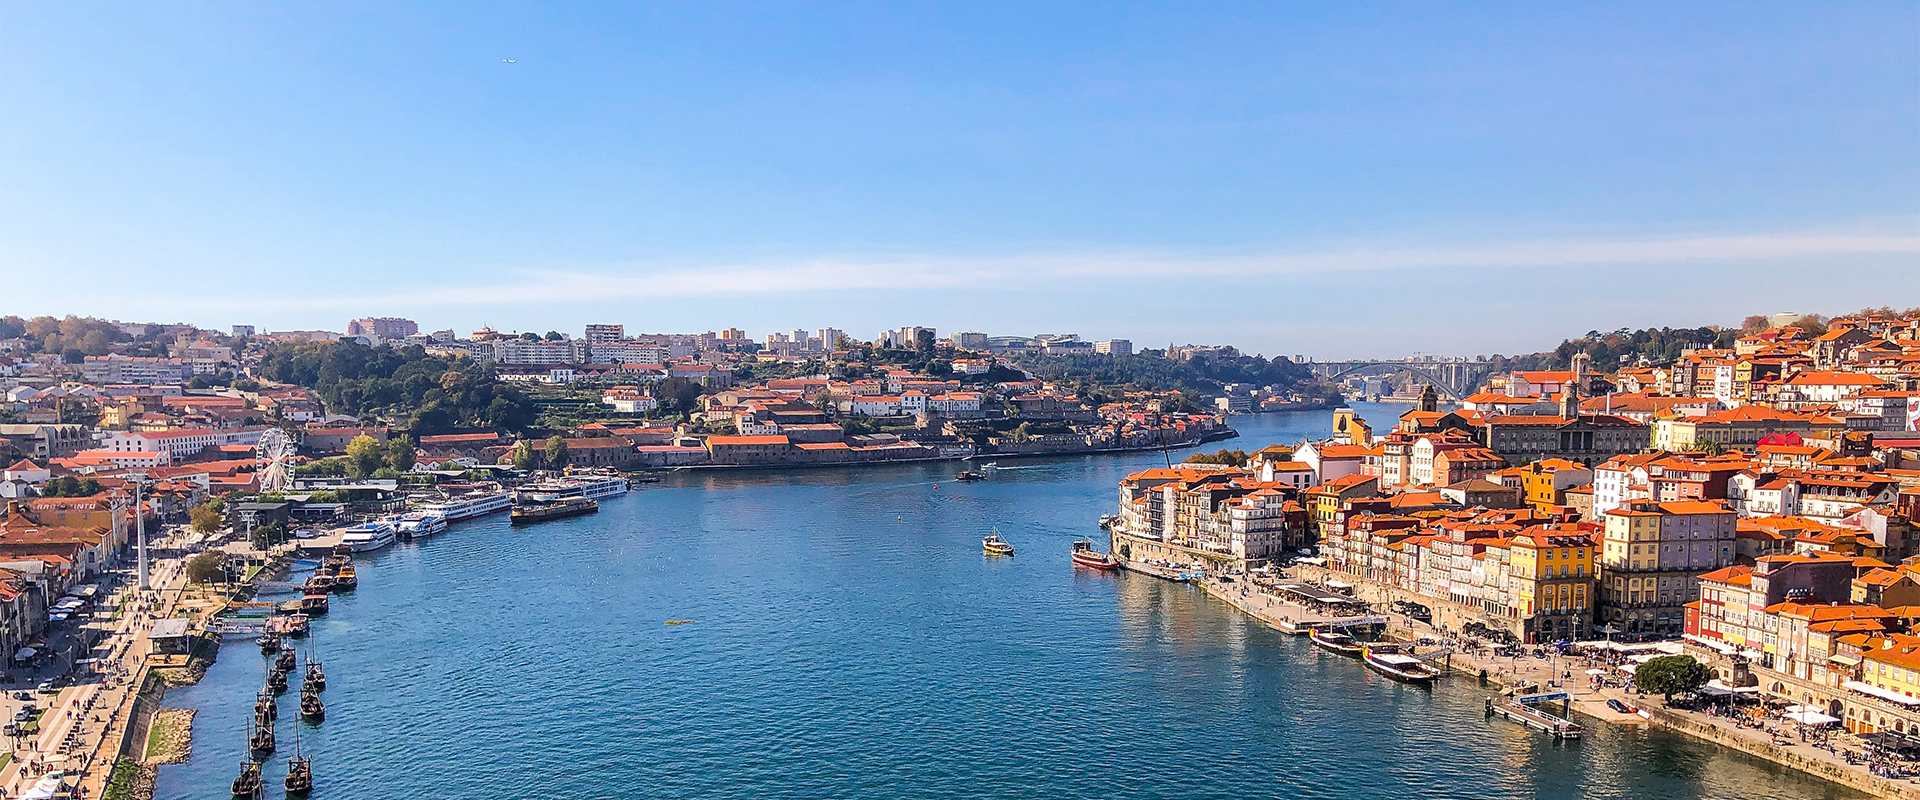 View of the Douro river and city of Porto